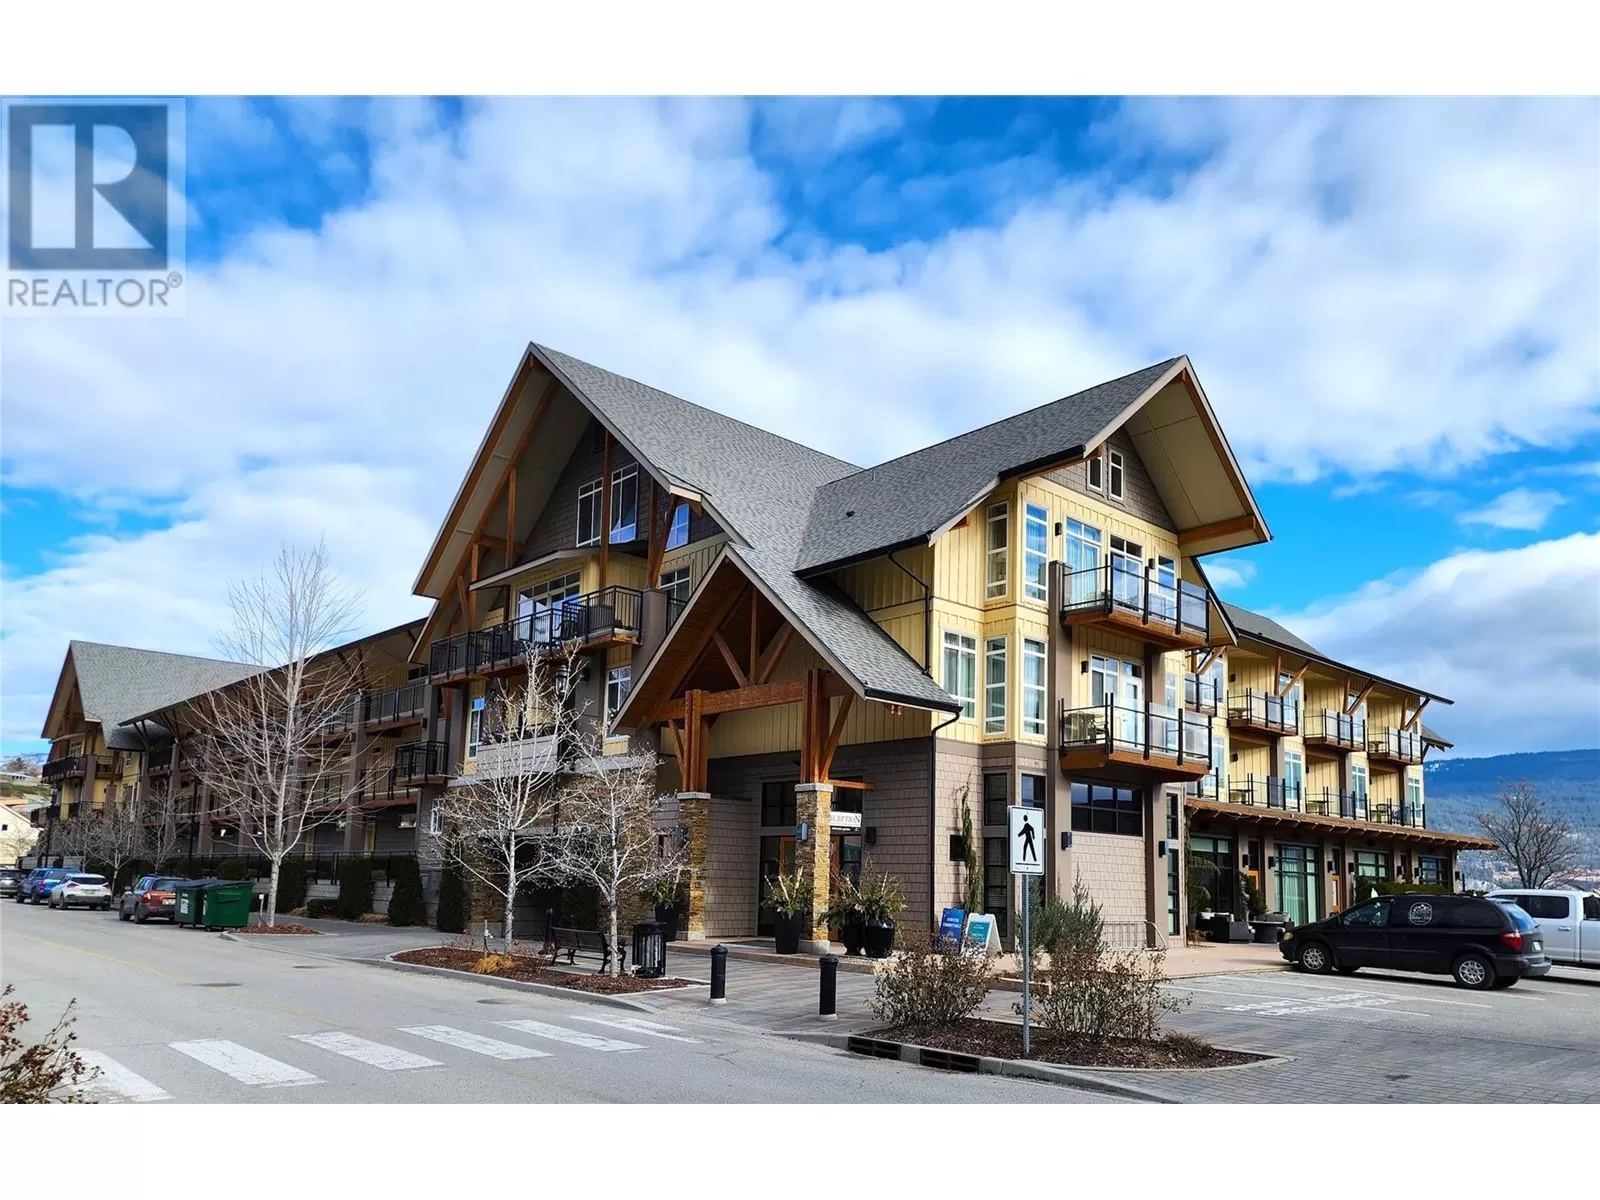 Recreational for rent: 13011 Lakeshore Drive Unit# 363, Summerland, British Columbia V0H 1Z1